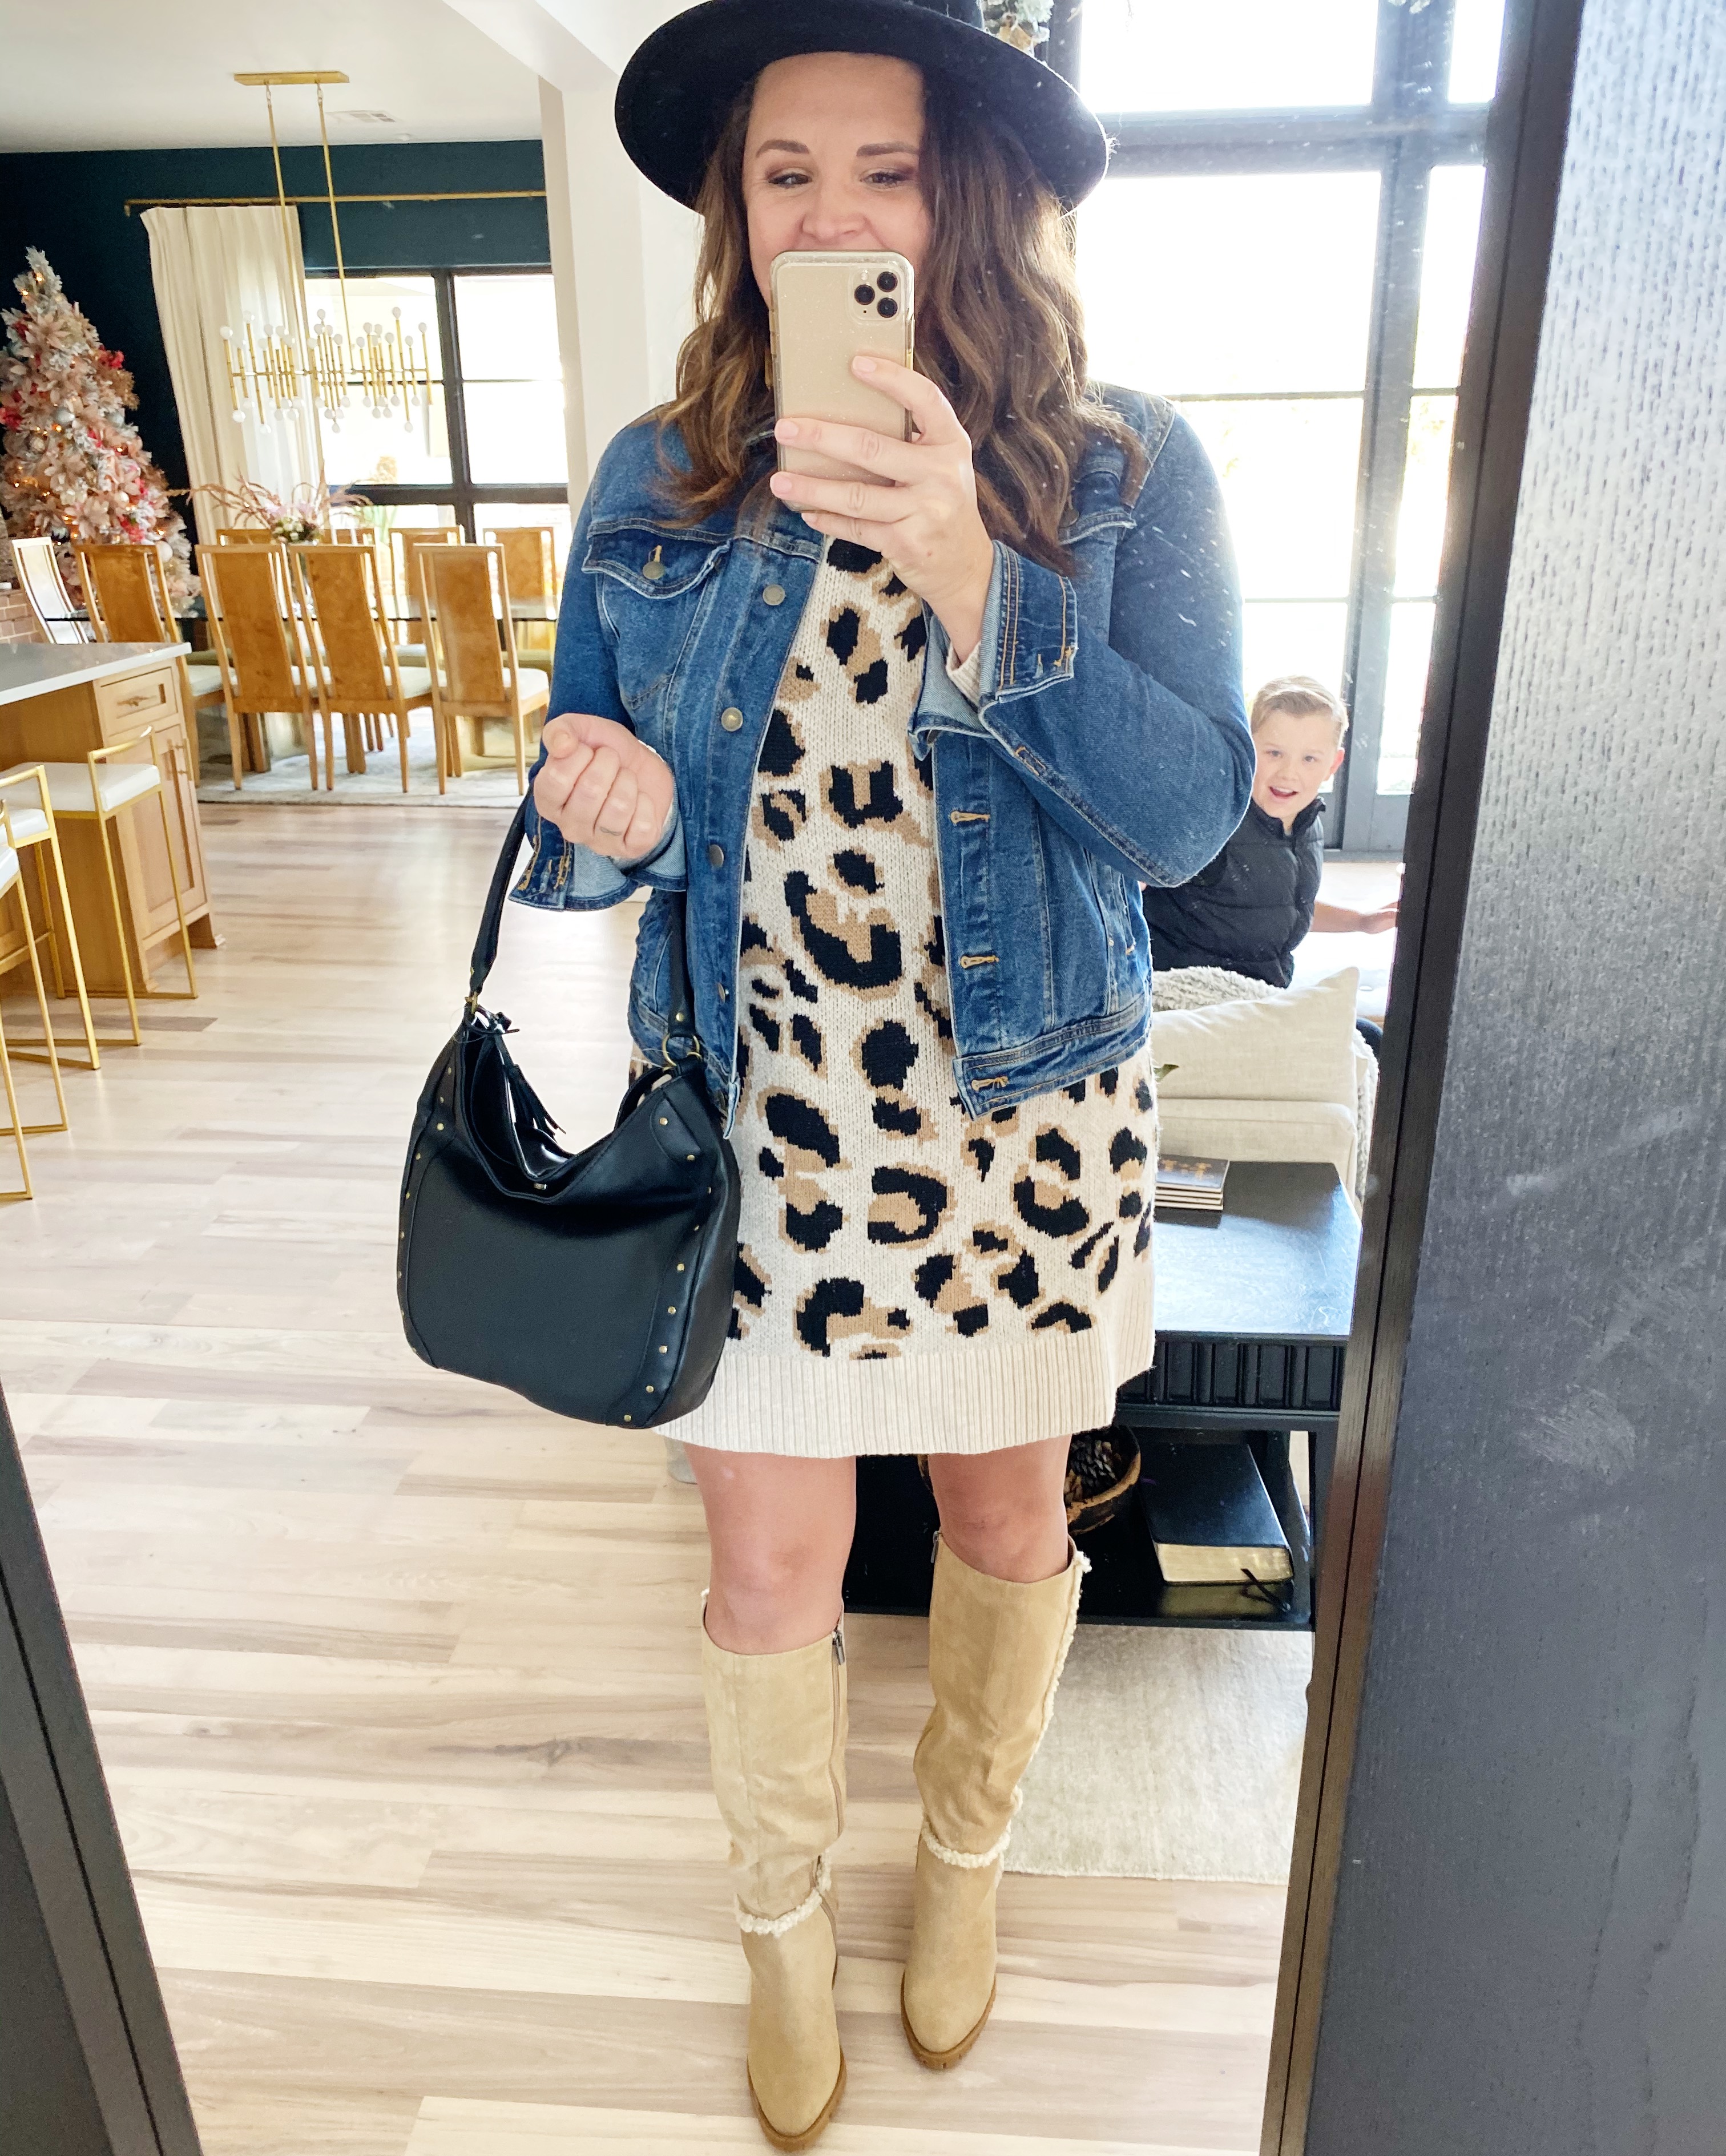 How to Style 20 Walmart Fashion Items 20 Ways leopard sweater dress with tall boots and a jean jacket